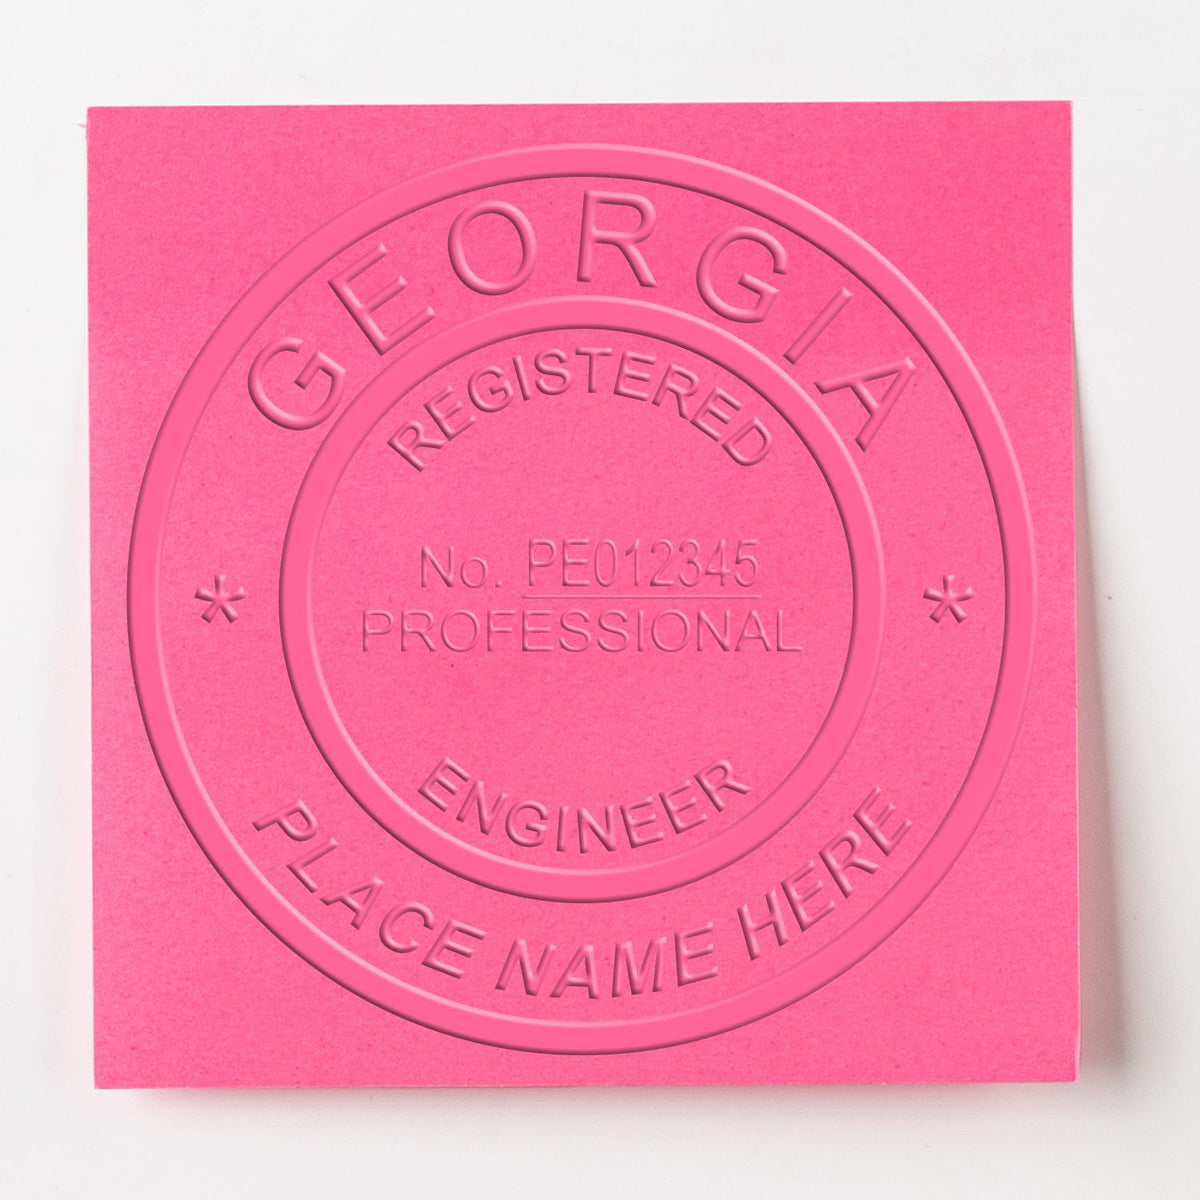 The Handheld Georgia Professional Engineer Embosser stamp impression comes to life with a crisp, detailed photo on paper - showcasing true professional quality.